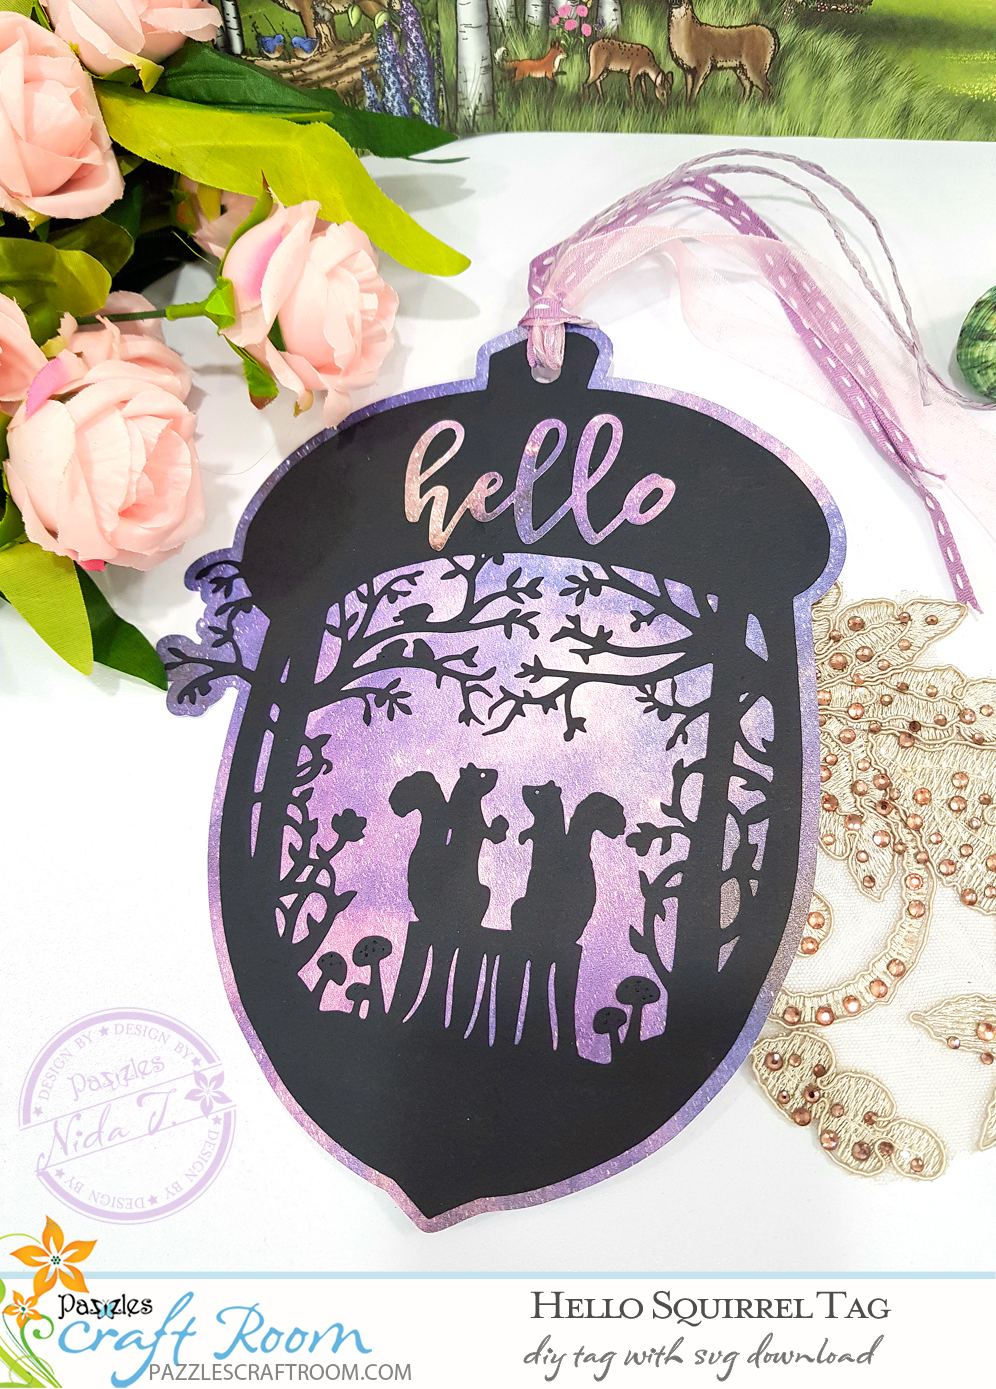 Pazzles DIY Hello Squirrel Tag with instant SVG download. Compatible with all major electronic cutters including Pazzles Inspiration, Cricut, and Silhouette Cameo. Design by Nida Tanweer.